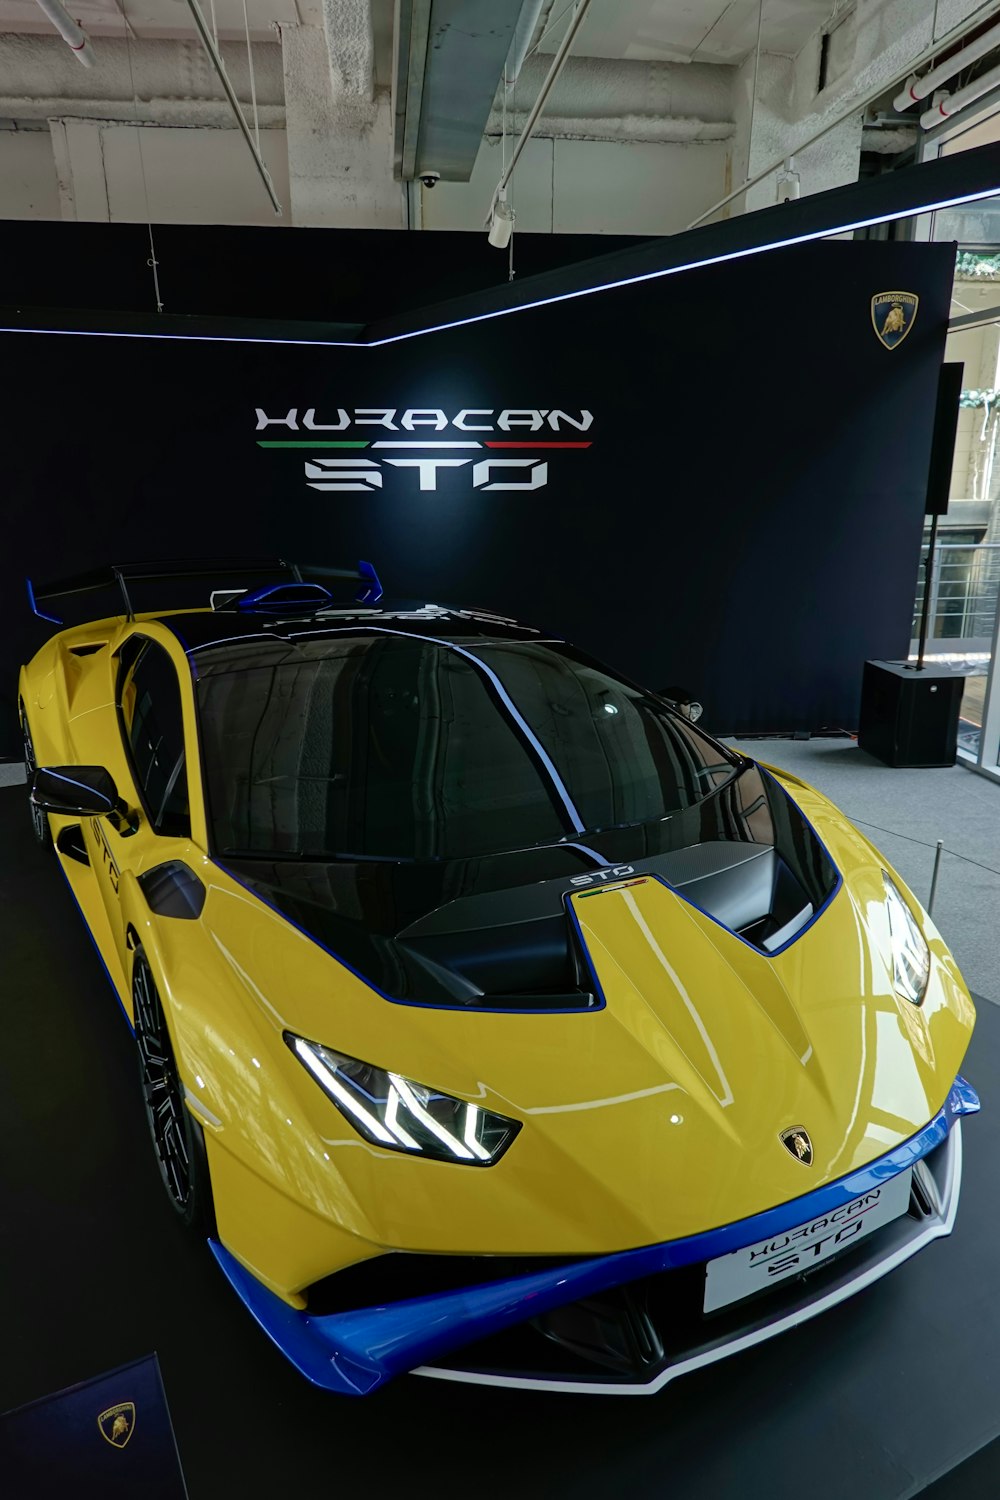 a yellow sports car on display in a showroom